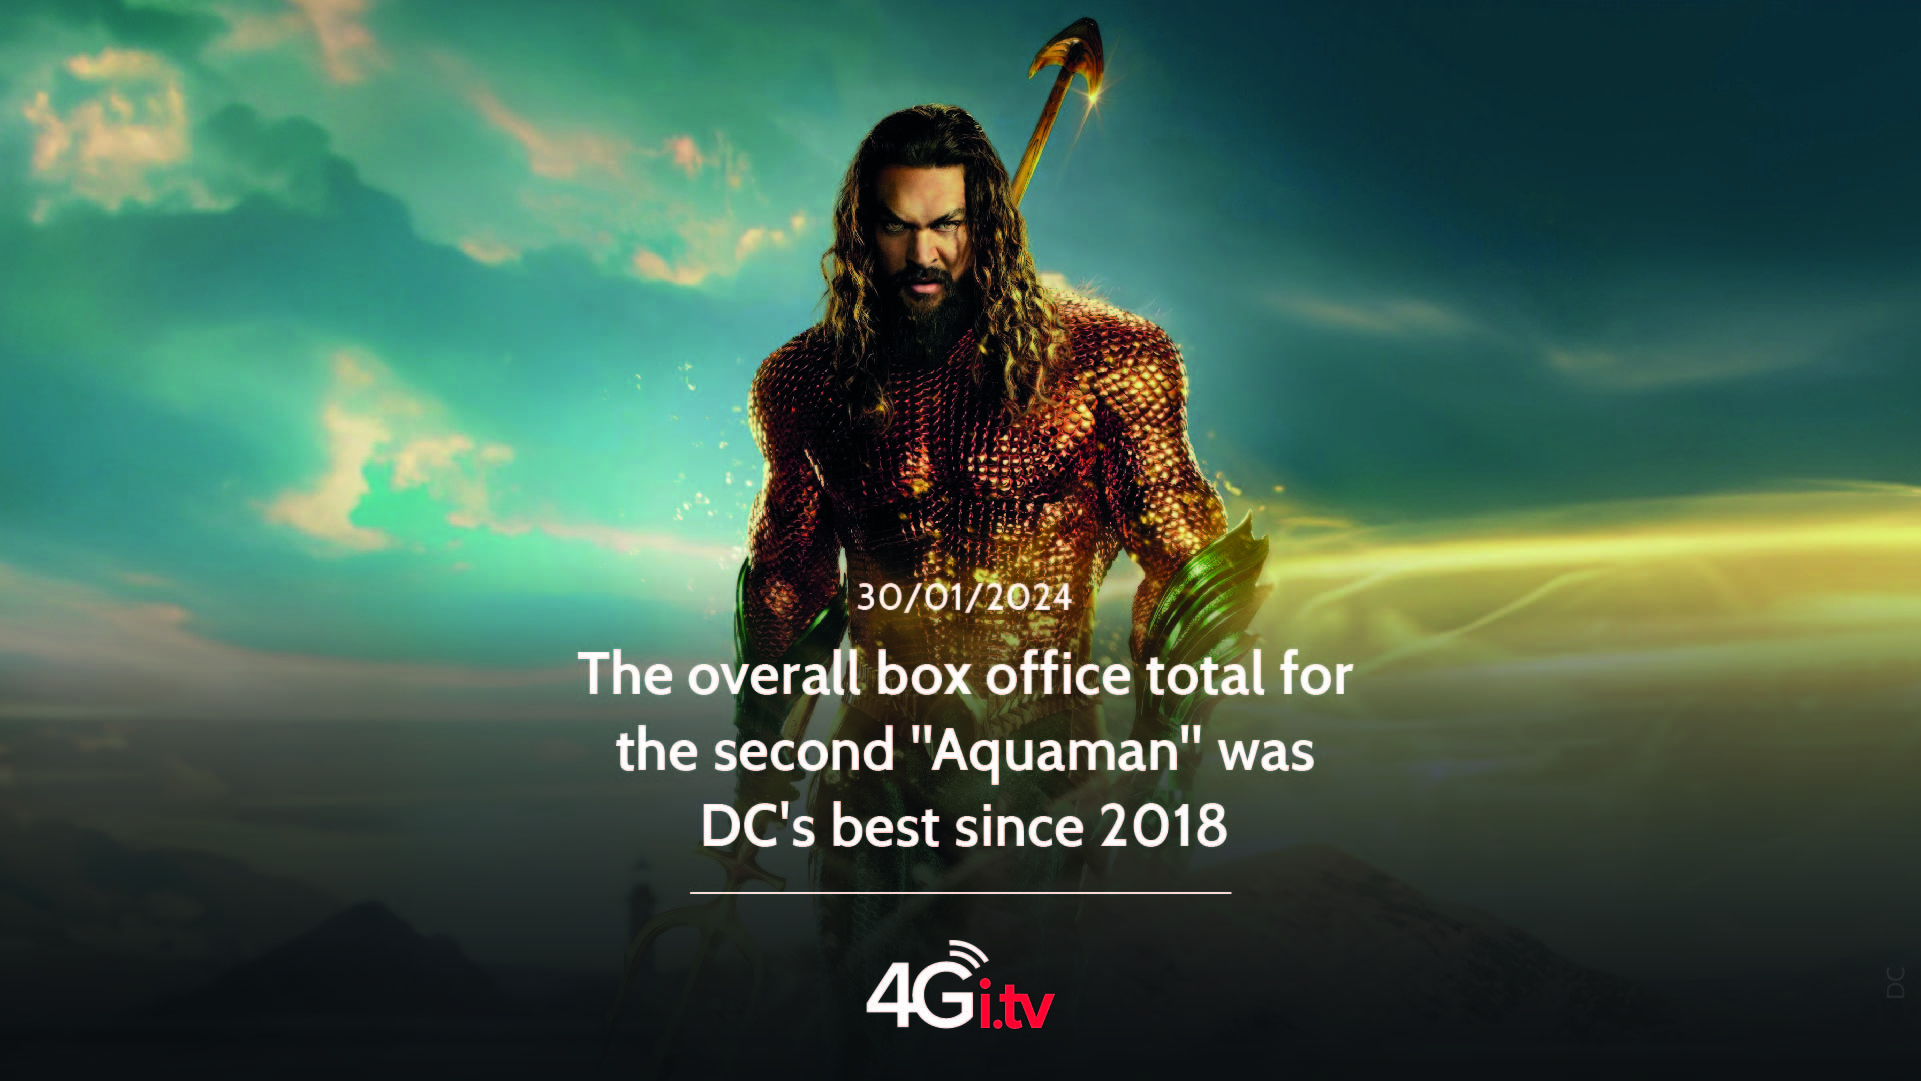 Подробнее о статье The overall box office total for the second “Aquaman” was DC’s best since 2018